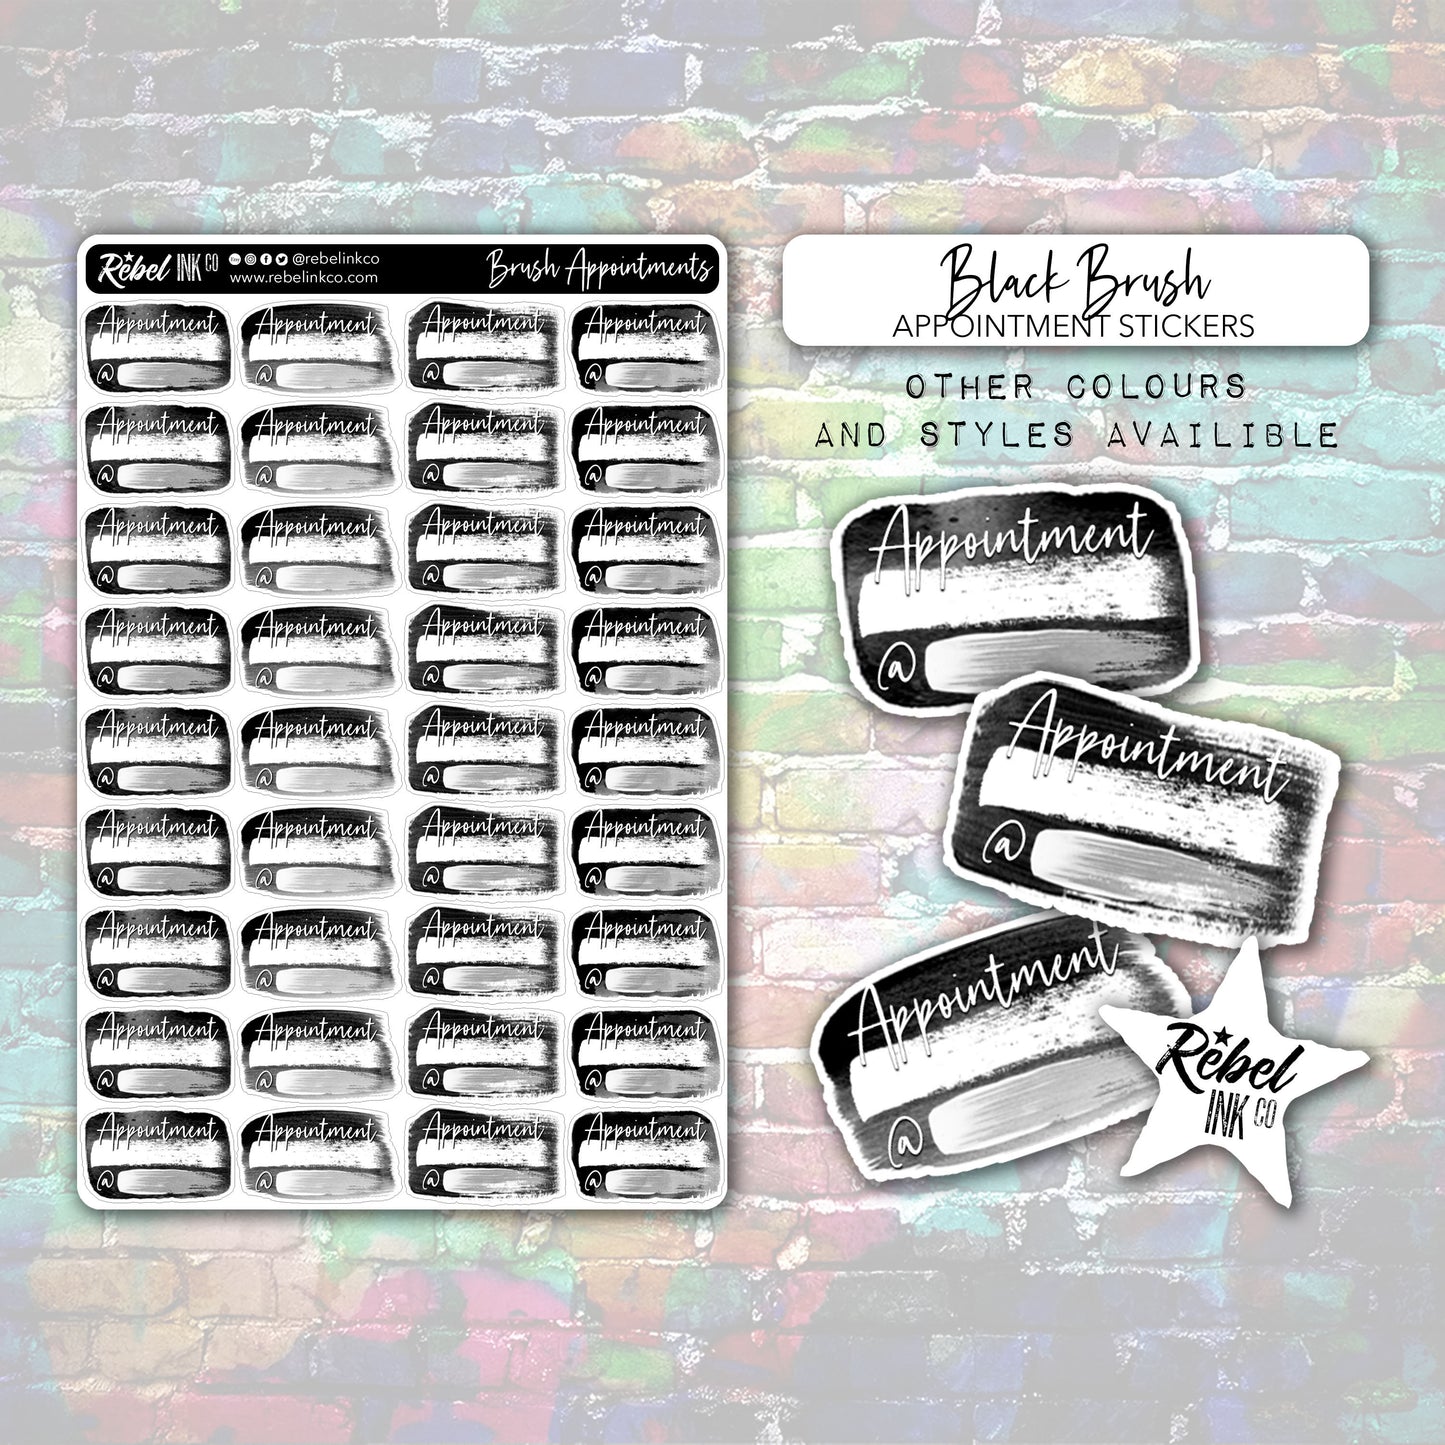 Appointment Stickers - Bright Rainbow - Brush Style